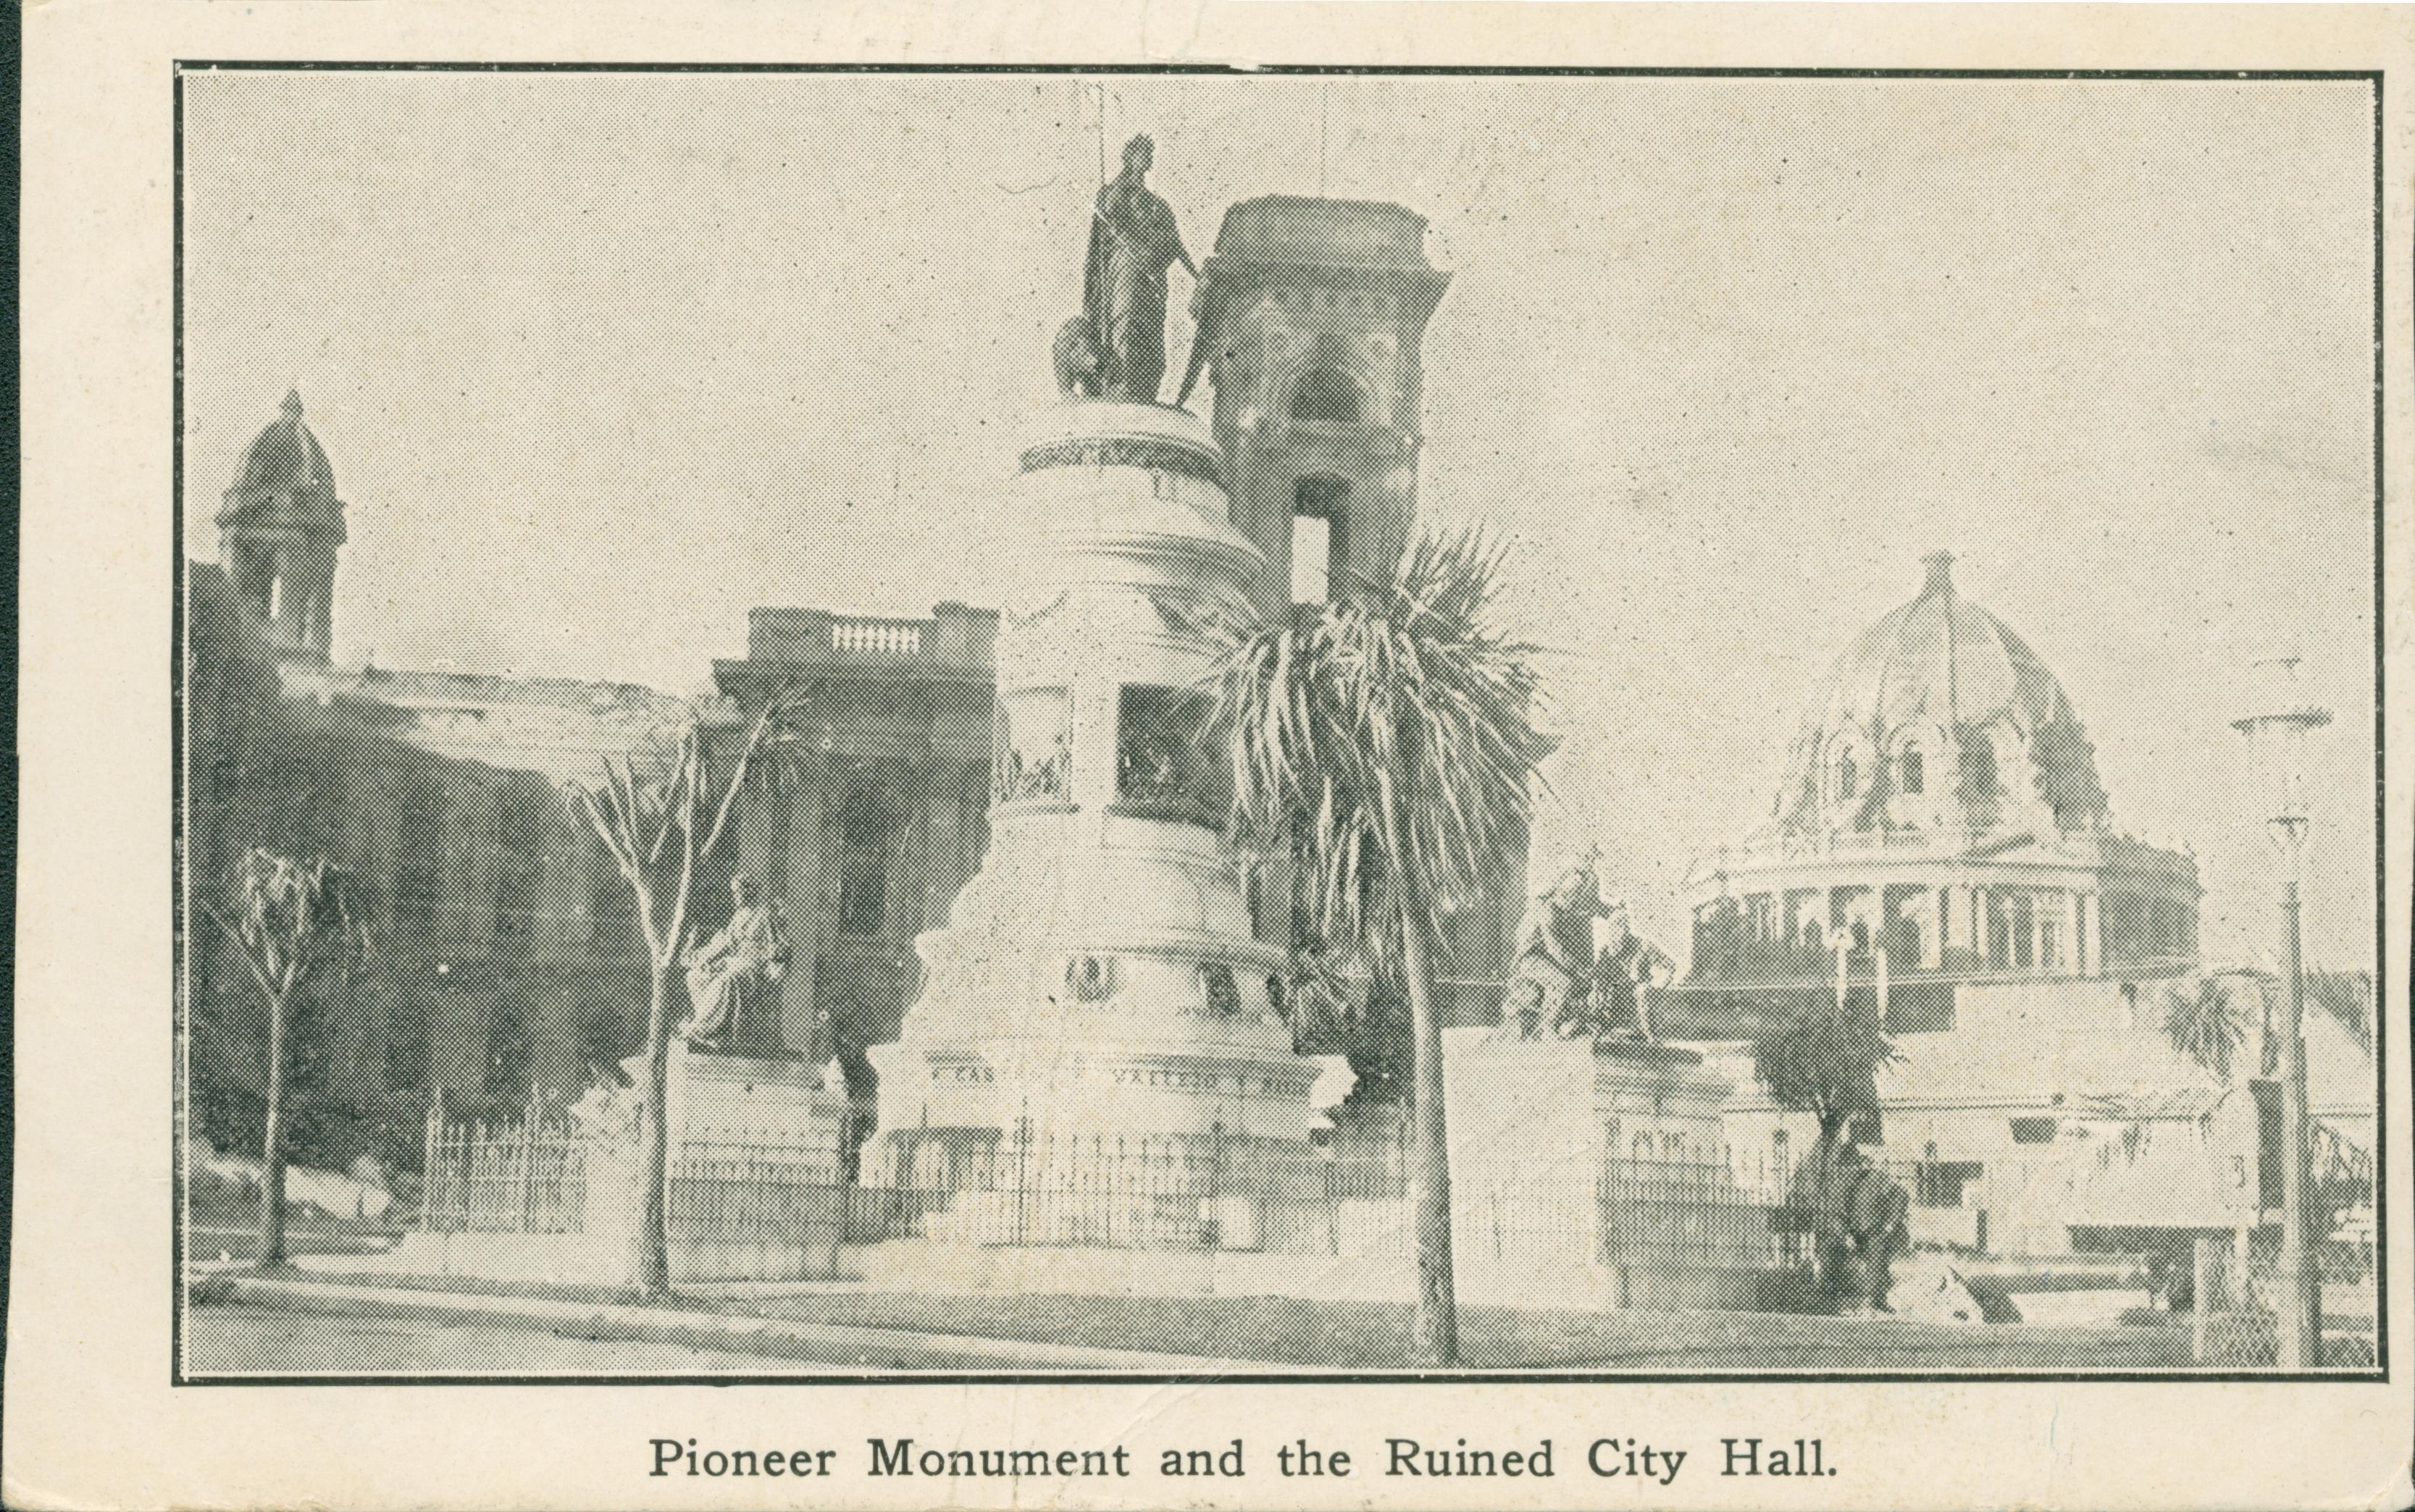 Photo of the Pioneer Monument with a ruined City Hall in the background.